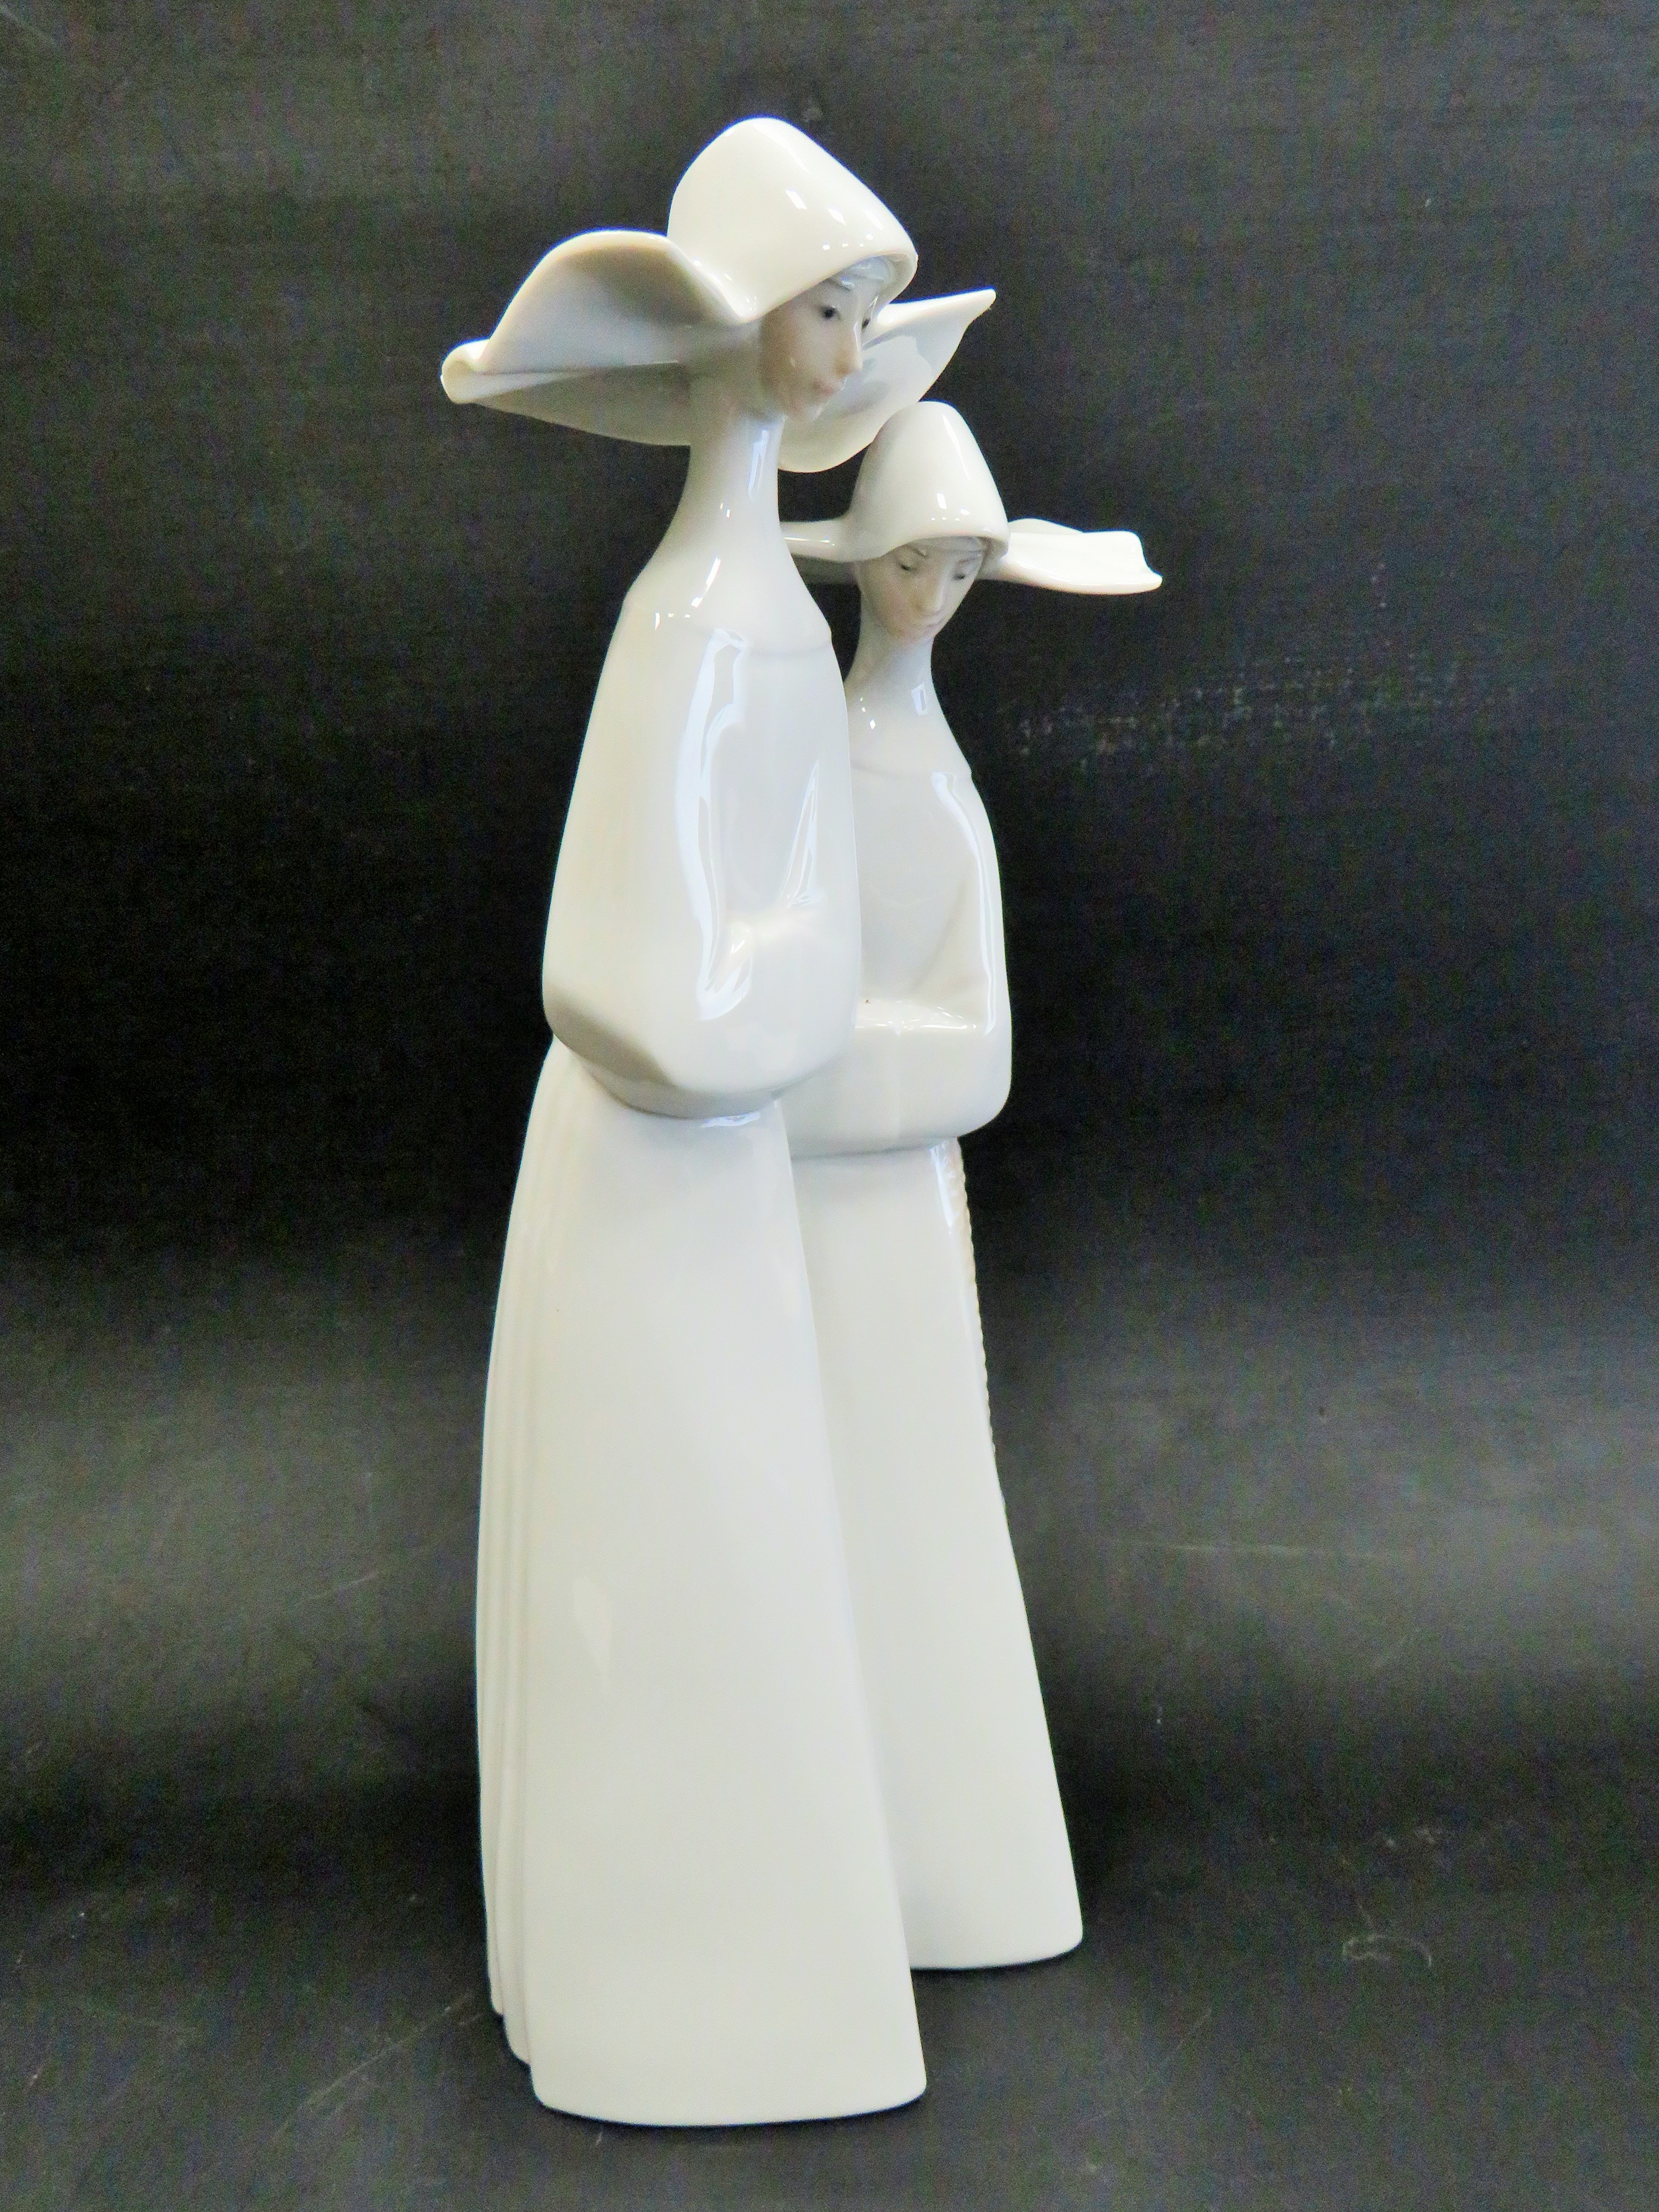 Lladro Figurine 'Two Nuns' 4611 in excellent condition. Measures approx 12 inches tall. See photos - Image 3 of 6